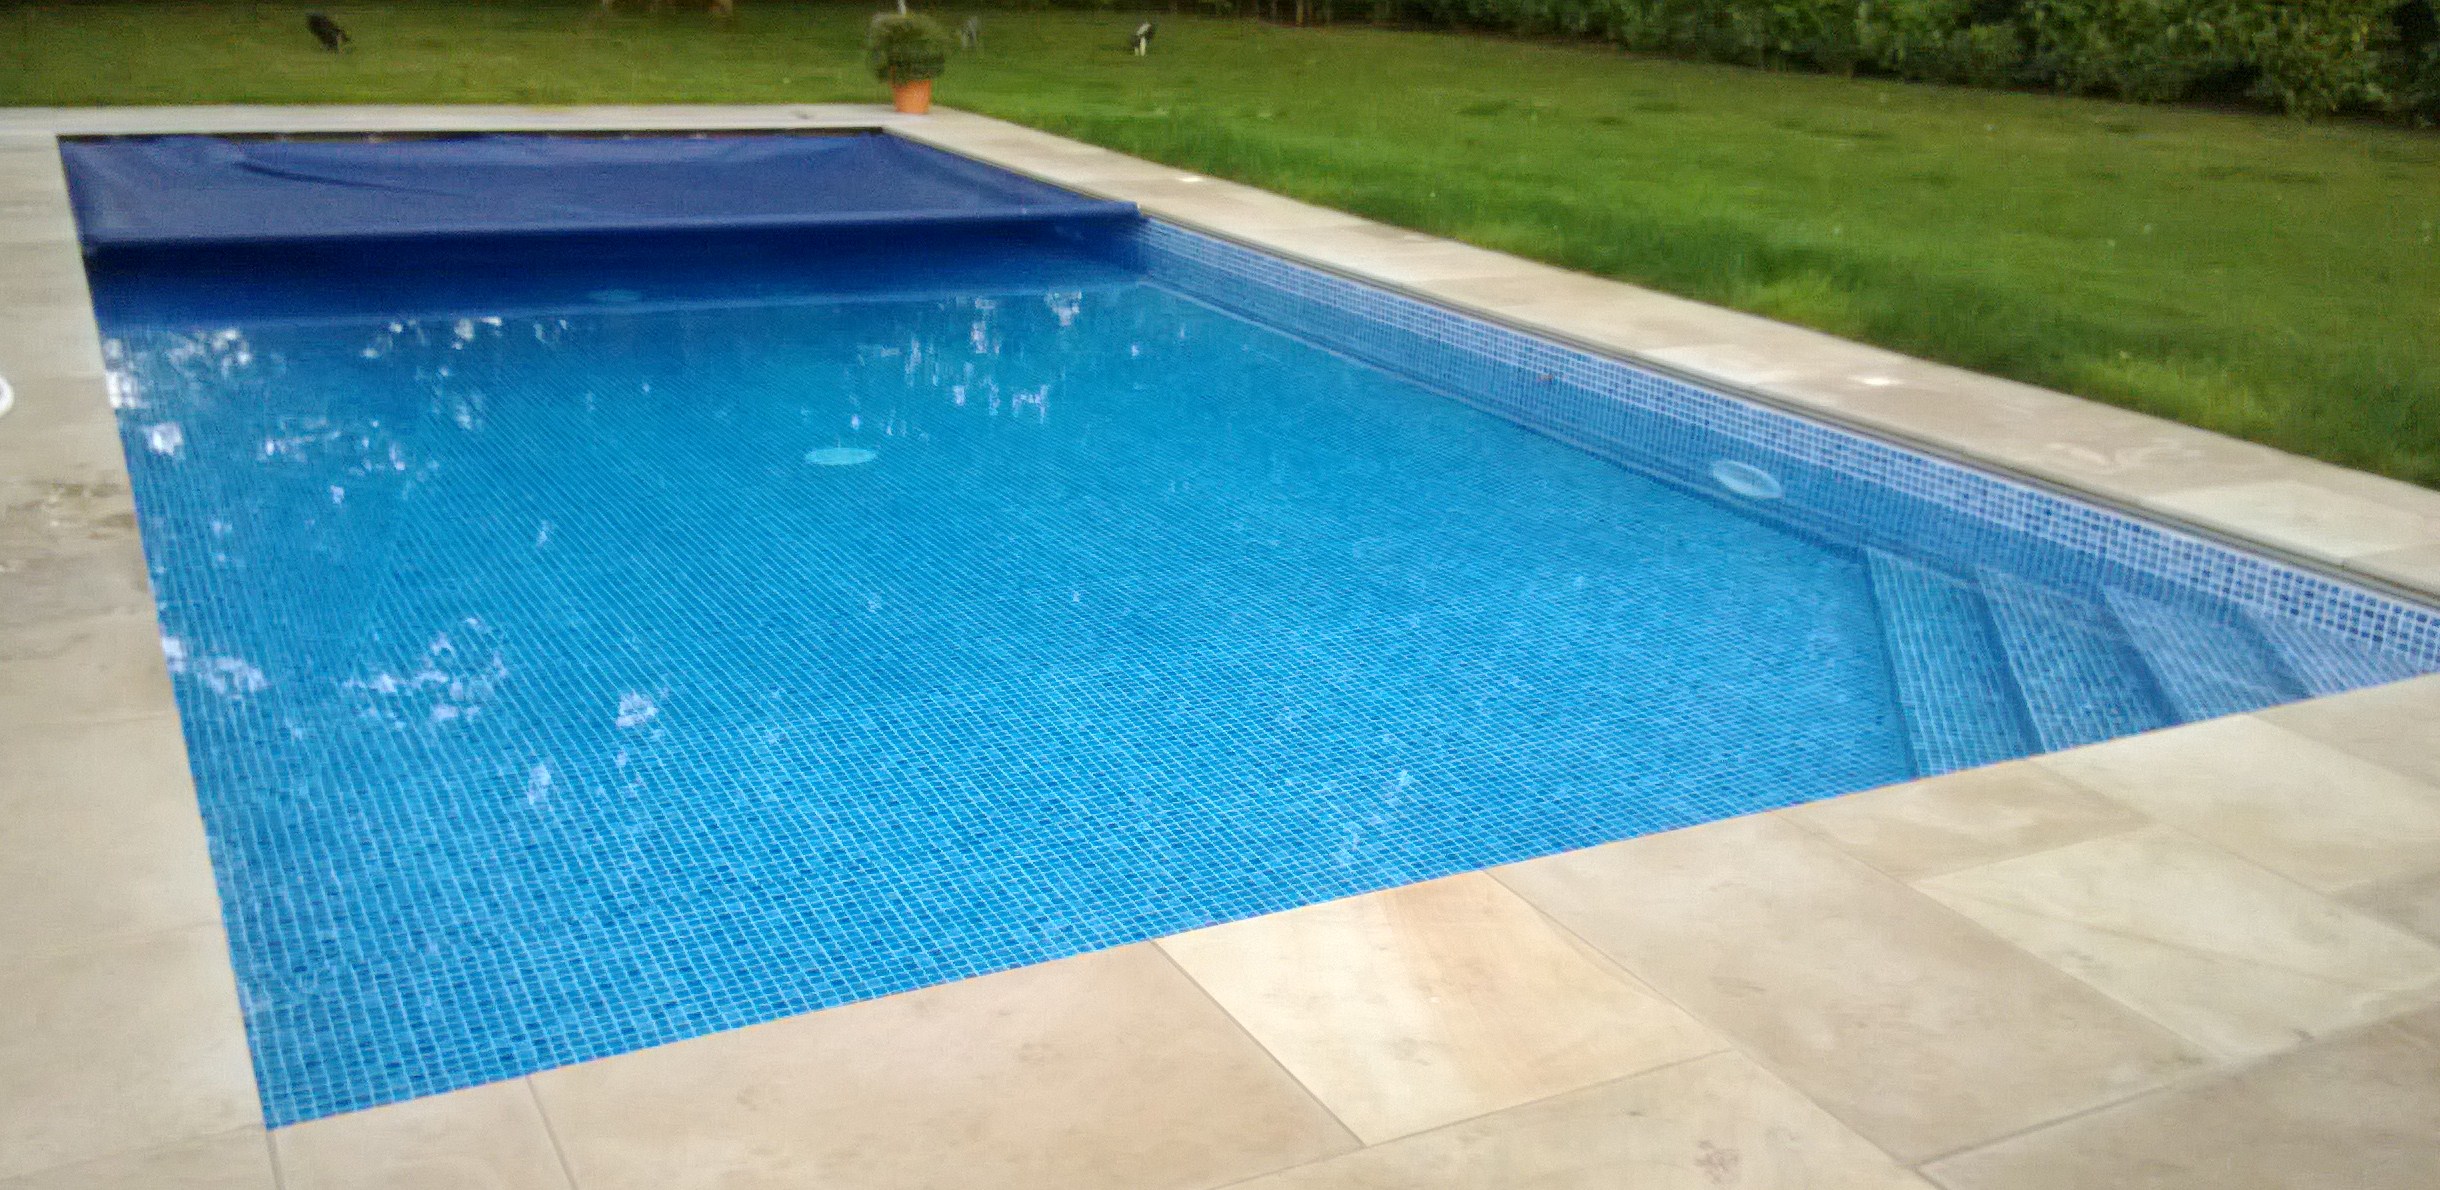 automatic pool cover cost